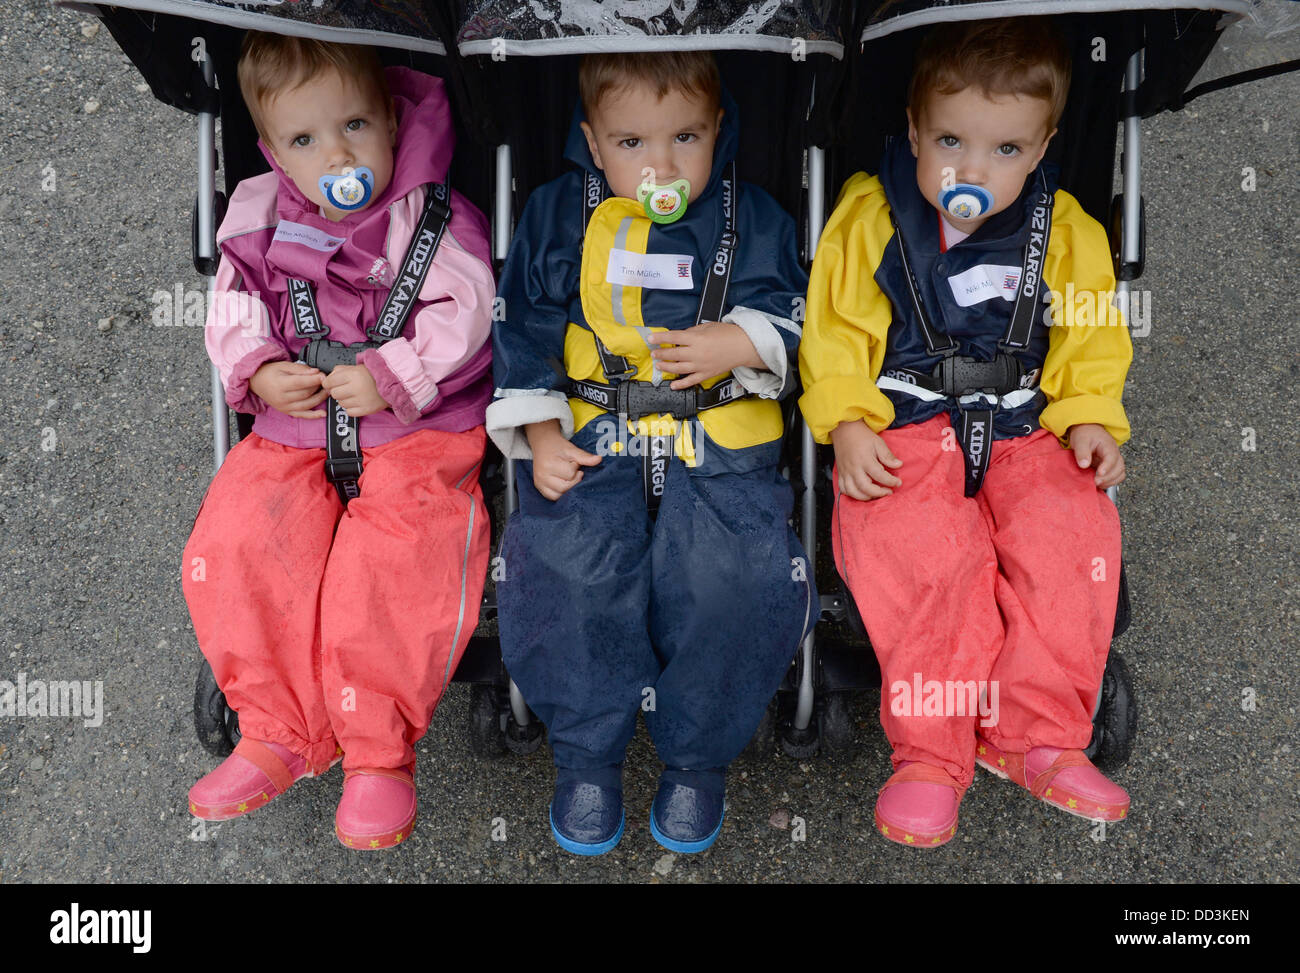 The triplets Christin (L-R), Tim and Niki sit in a carriage at the Triplet meeting held at Hessen Park on a rainy day in Neu-Anspach, Germany, 25 August 2013. The governor of Hesse is a godfather for all children of multiple births and hosts an event each year for them. Photo: ARNE DEDERT Stock Photo